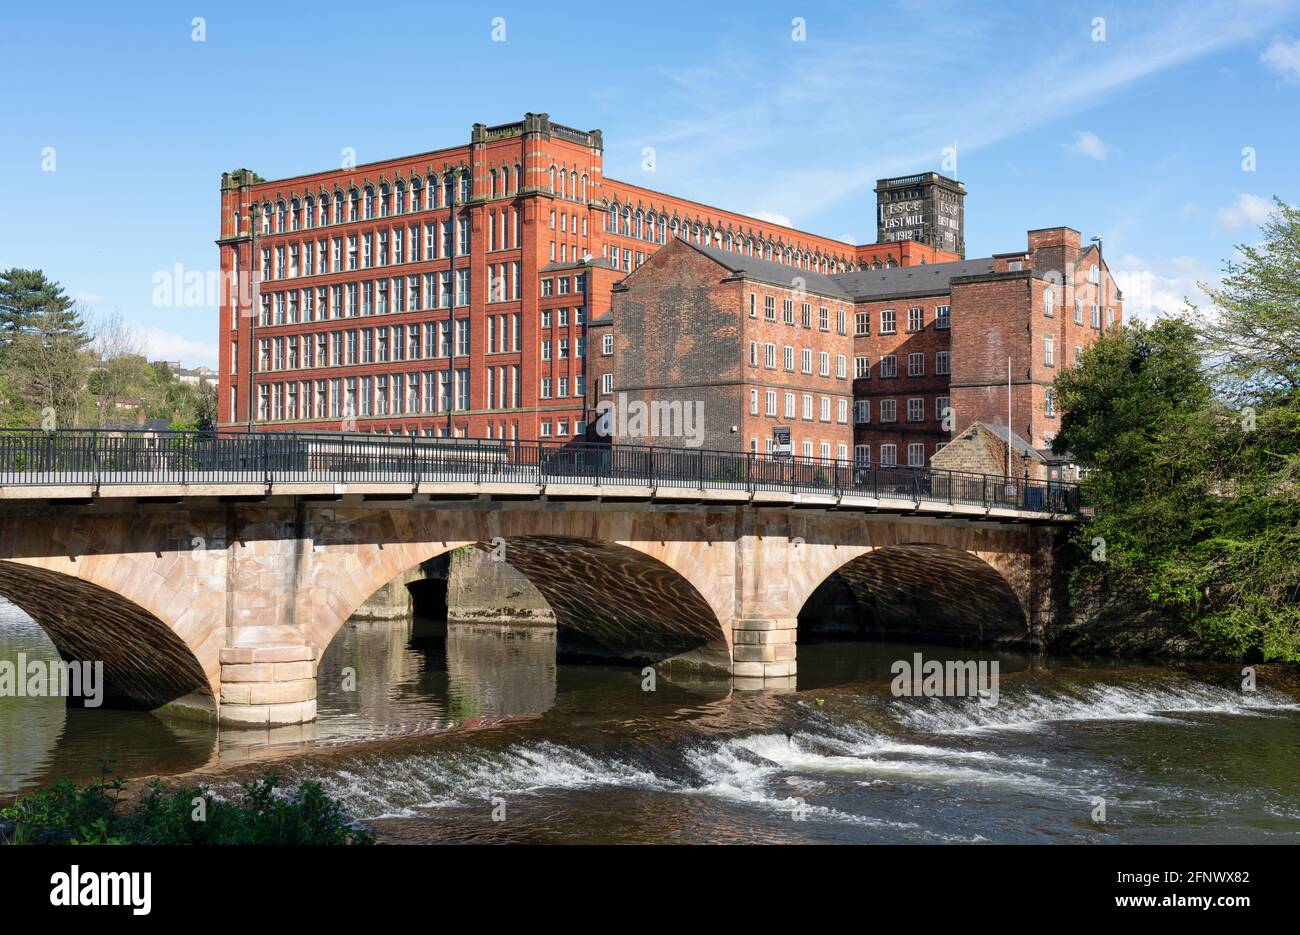 Belper North Mill also known as Strutt's North Mill on the River Derwent in Derbyshire UK built as a cotton mill in the early industrial revolution Stock Photo